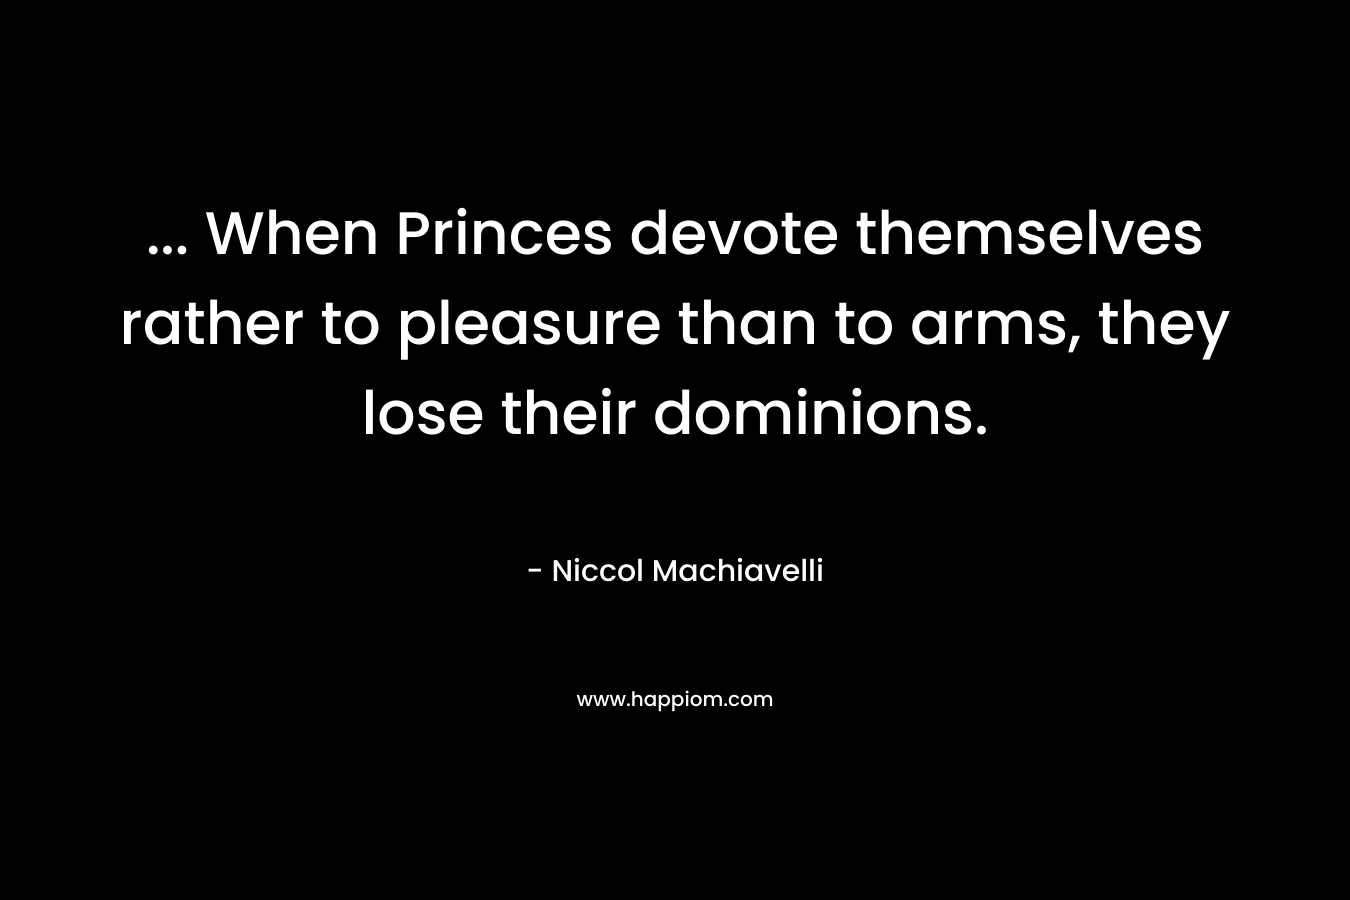 ... When Princes devote themselves rather to pleasure than to arms, they lose their dominions.